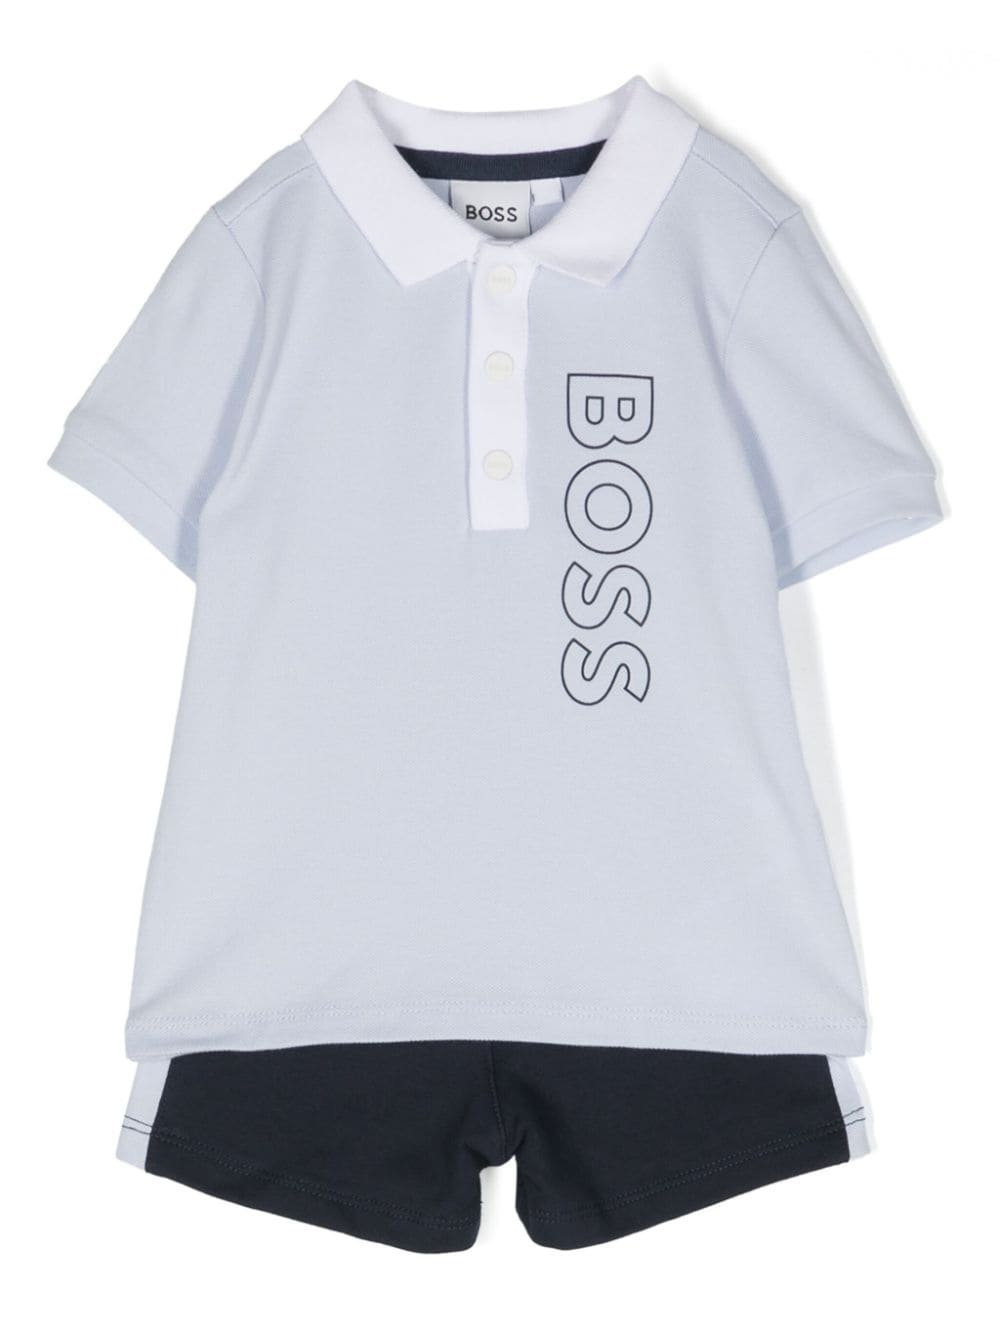 Light blue and blue sports outfit for newborns